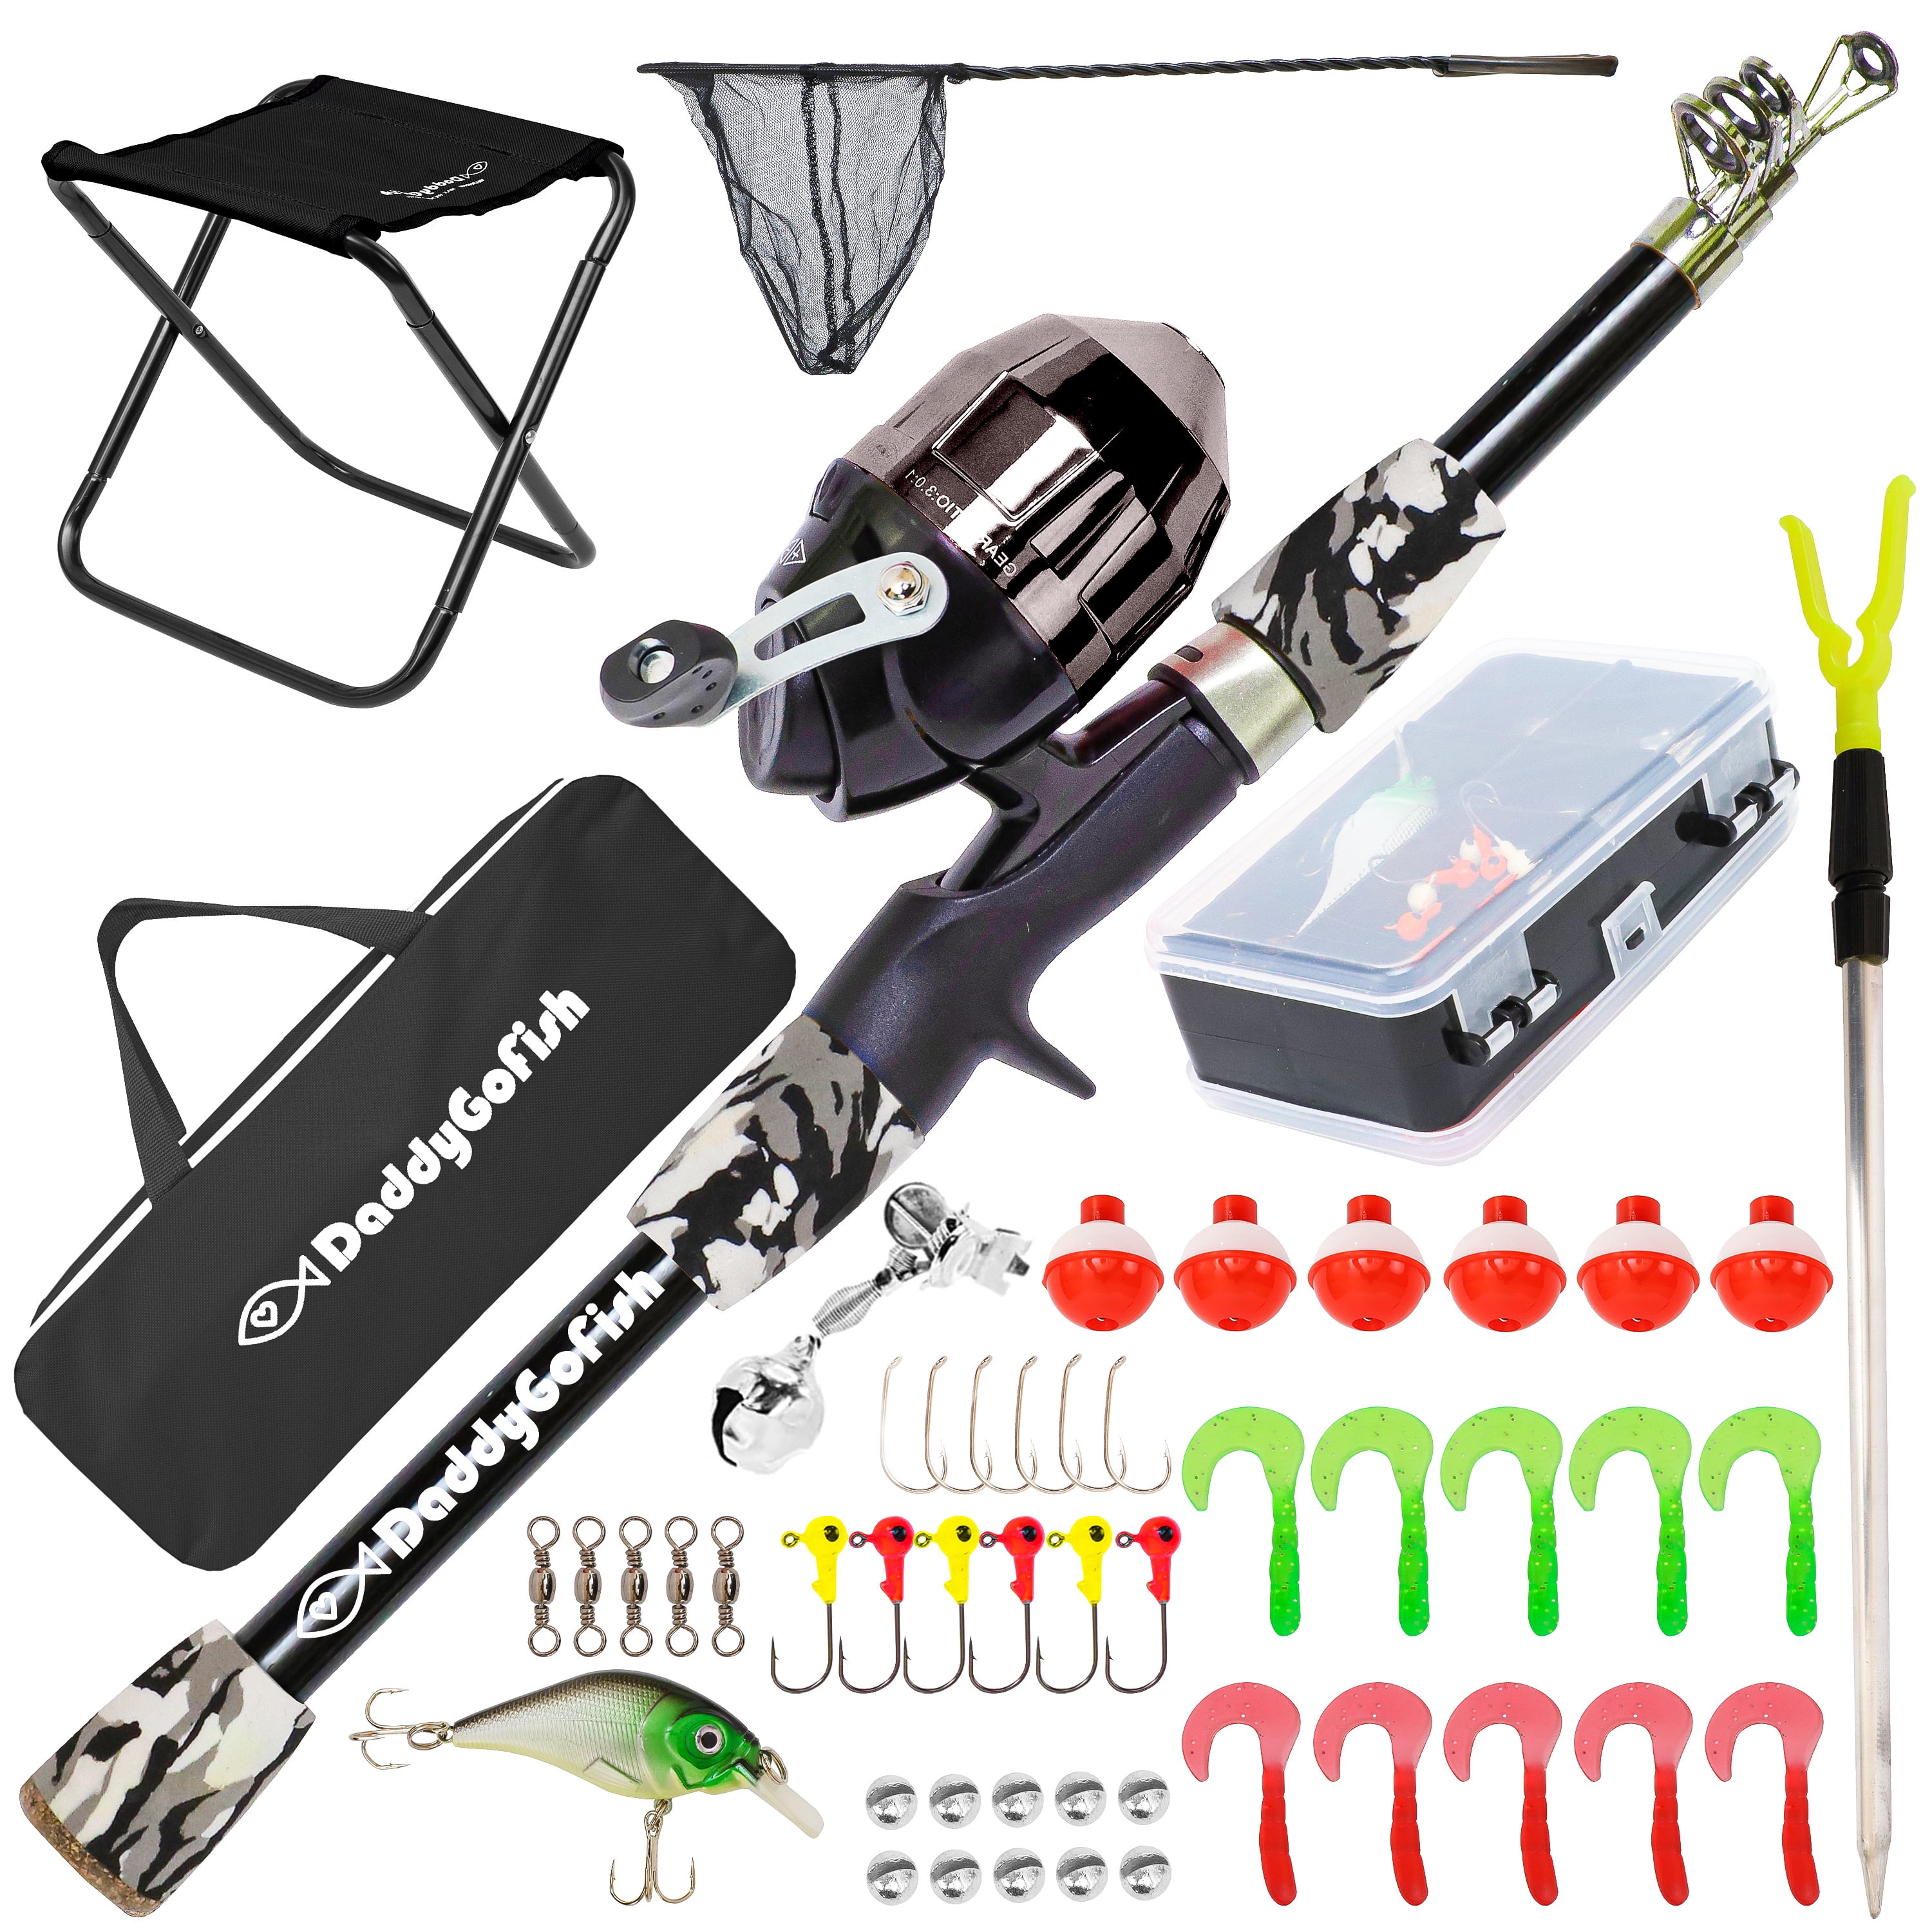 Kids Fishing Pole Kit, 59'' Telescopic Rod and Reel Beginner Combo with Spincast Reel,Tackle Box, Carrier Bag,Fishing Gear Gifts for Boys,Girls